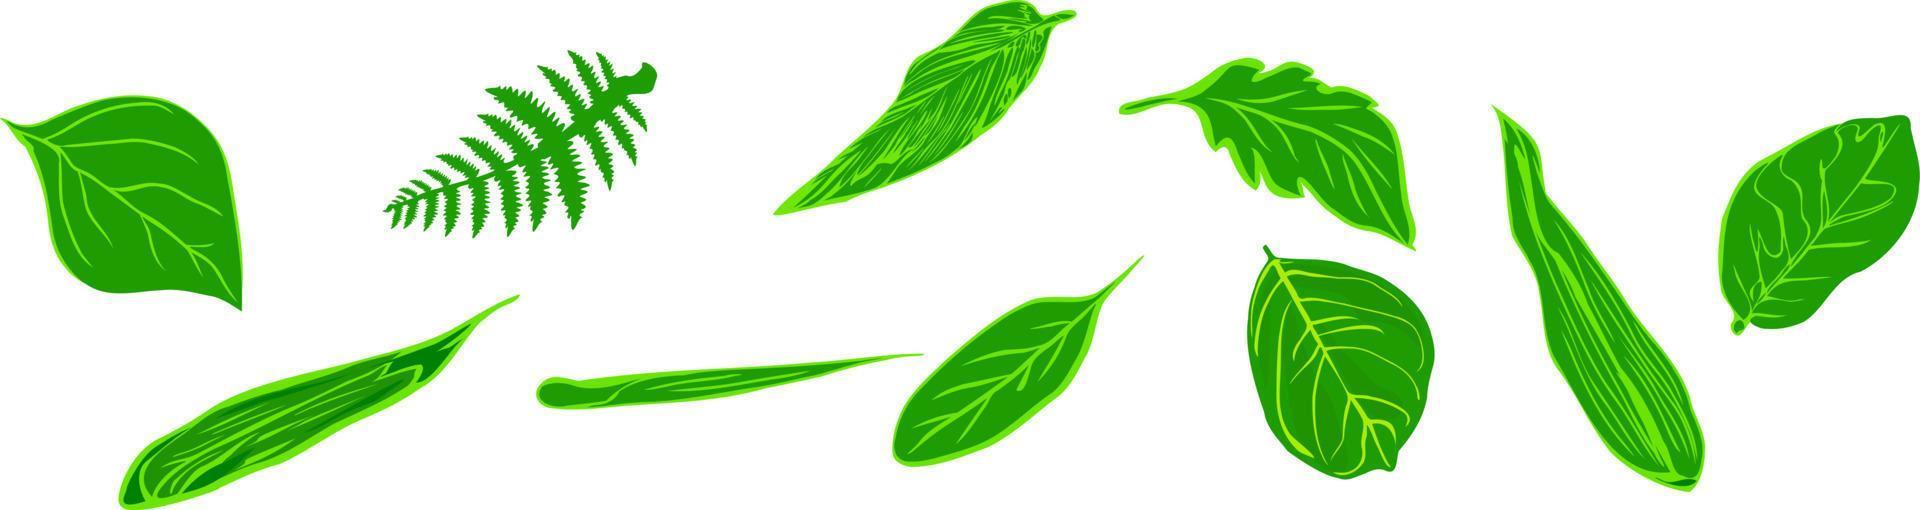 Green nature leaves on white vector